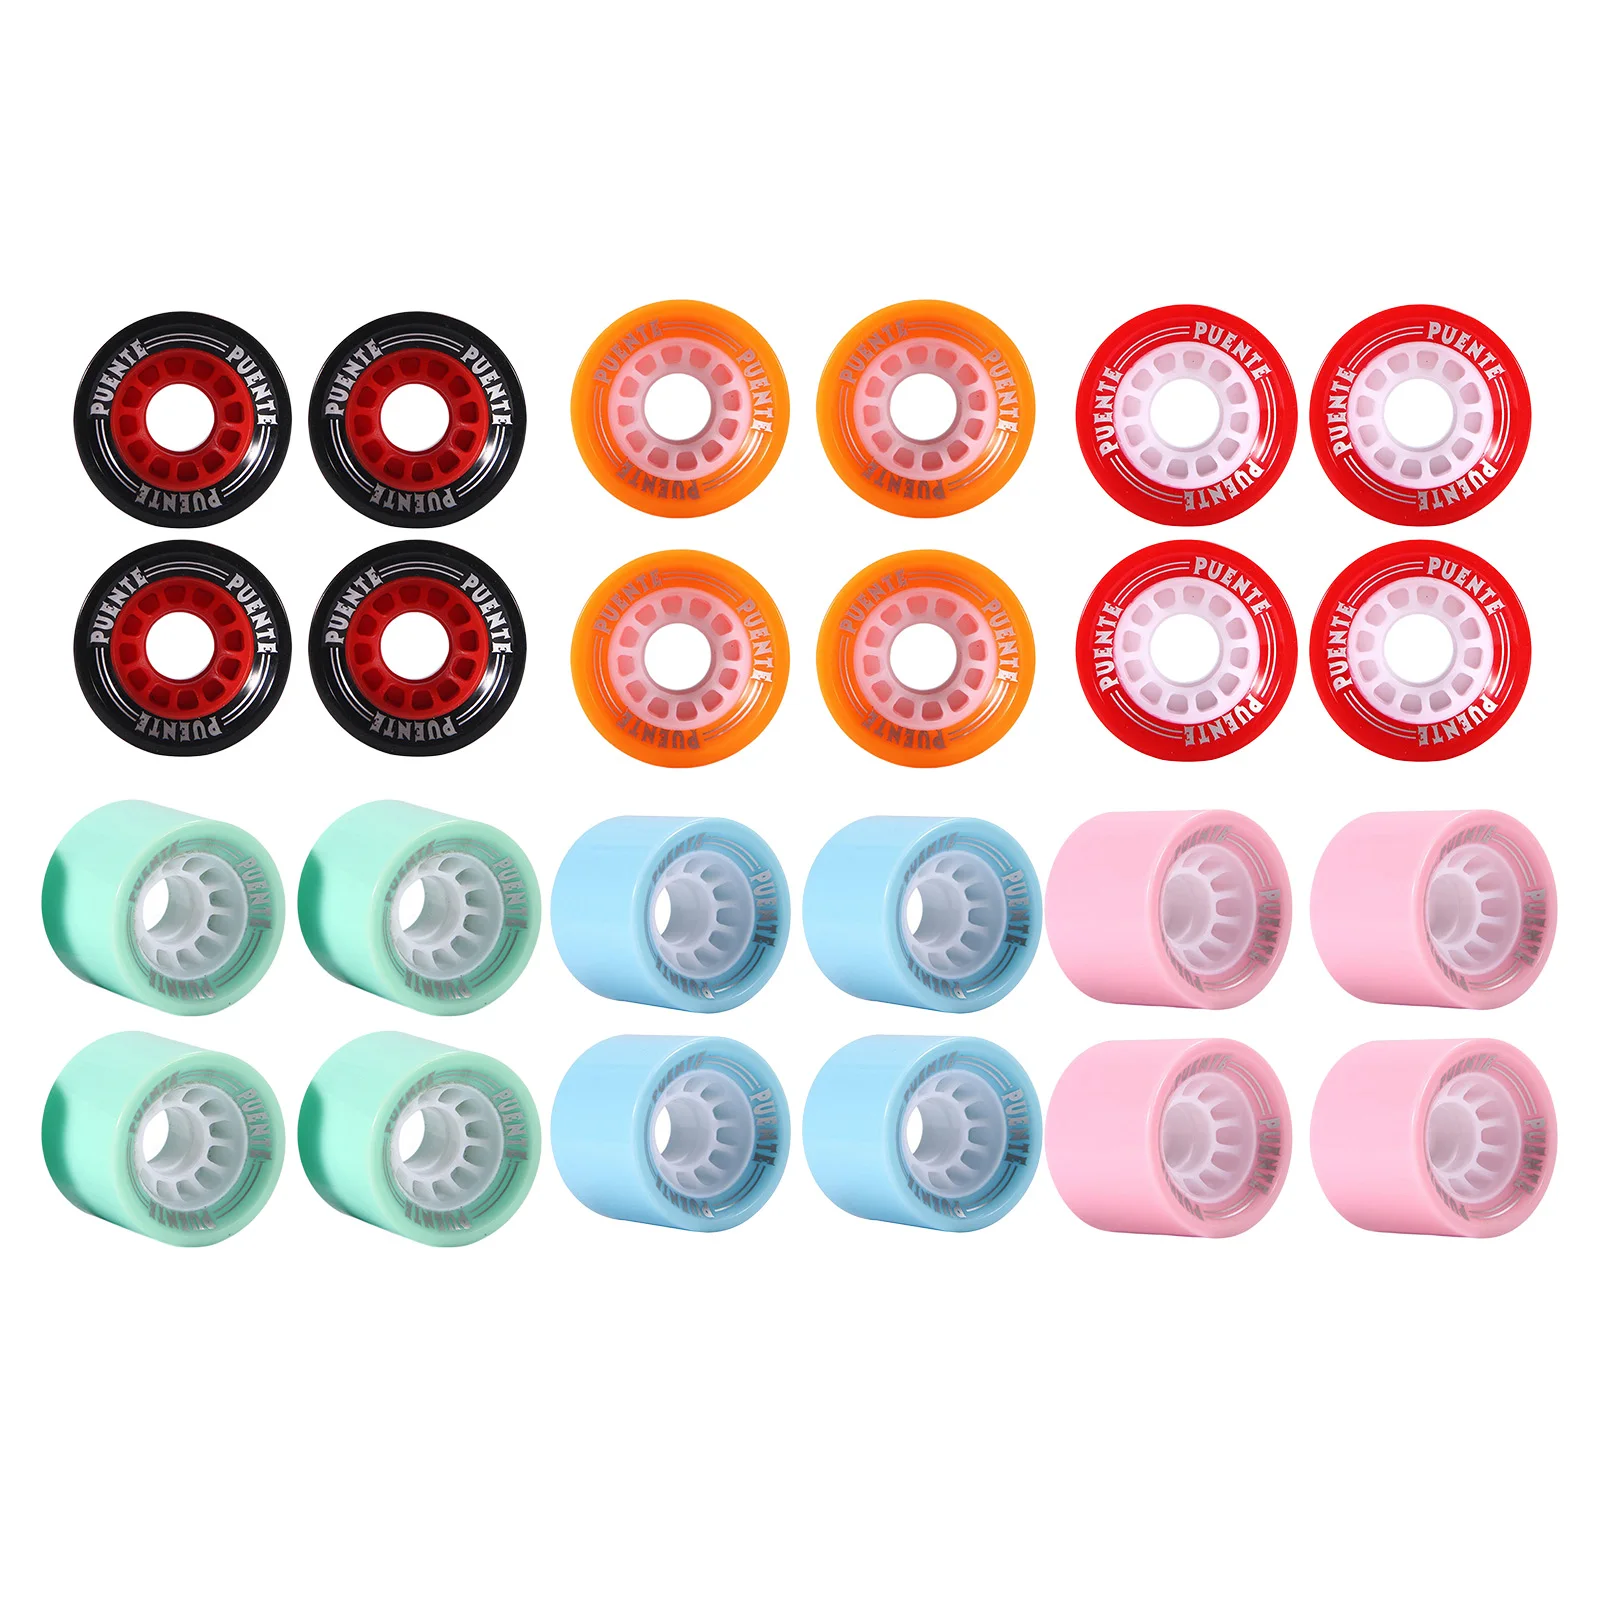 

4 Pieces Skateboard Wheels 70x51mm Hardness PU Stable Quiet Smooth Anti-wear Cruising Wheel Bearings and Spacers Set